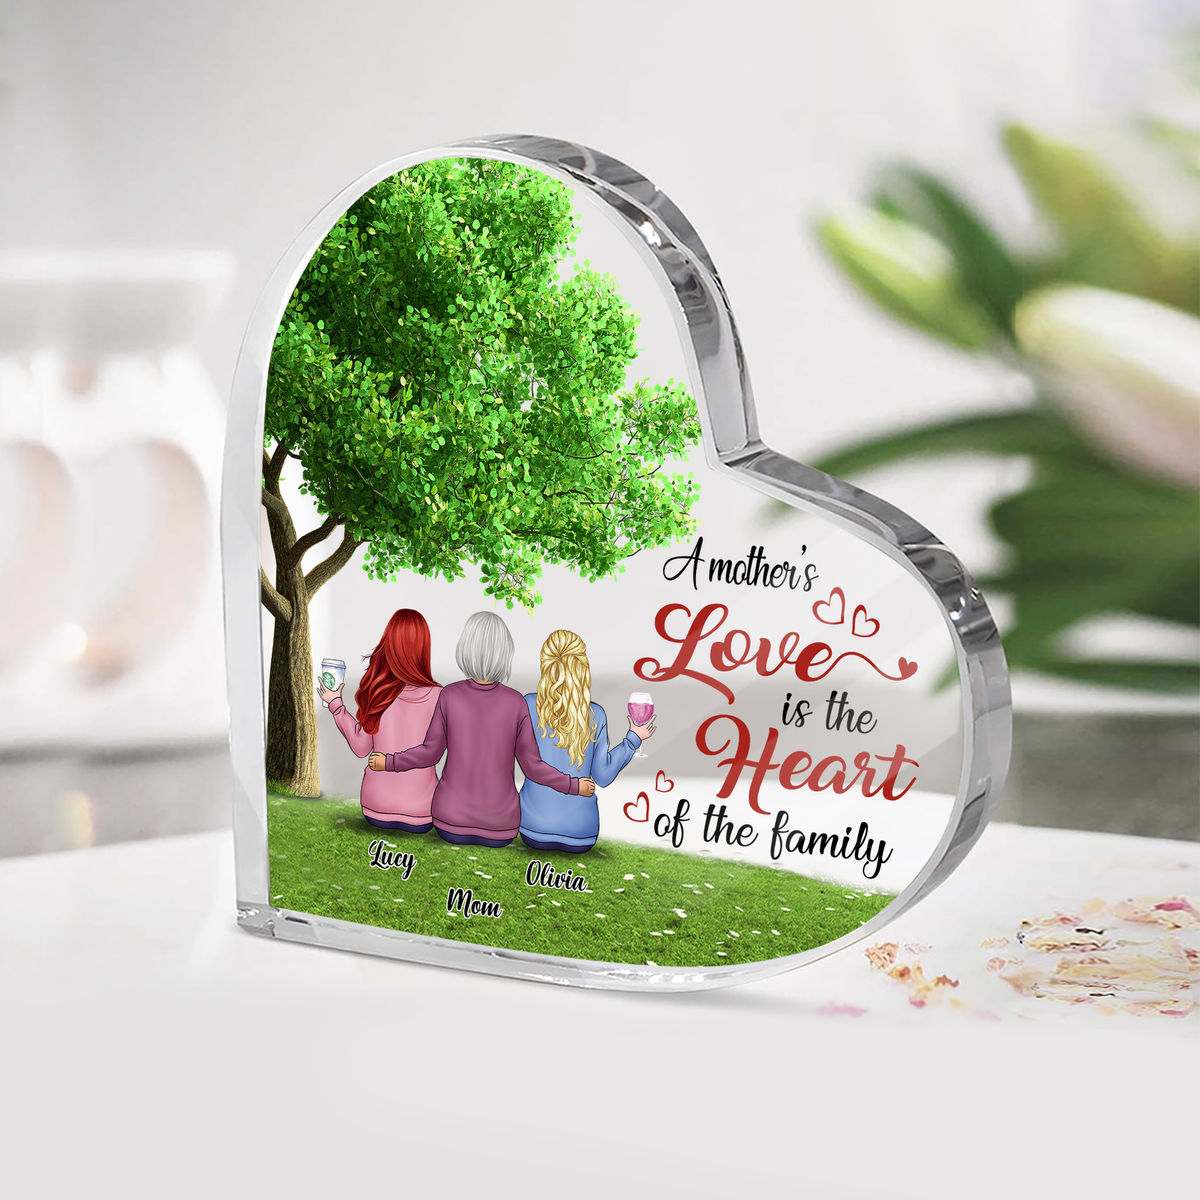 Personalized Desktop - Semitest - Transparent Plaque - A mother's love is the heart of the family (Custom Heart - Shaped Acrylic Plaque)_1